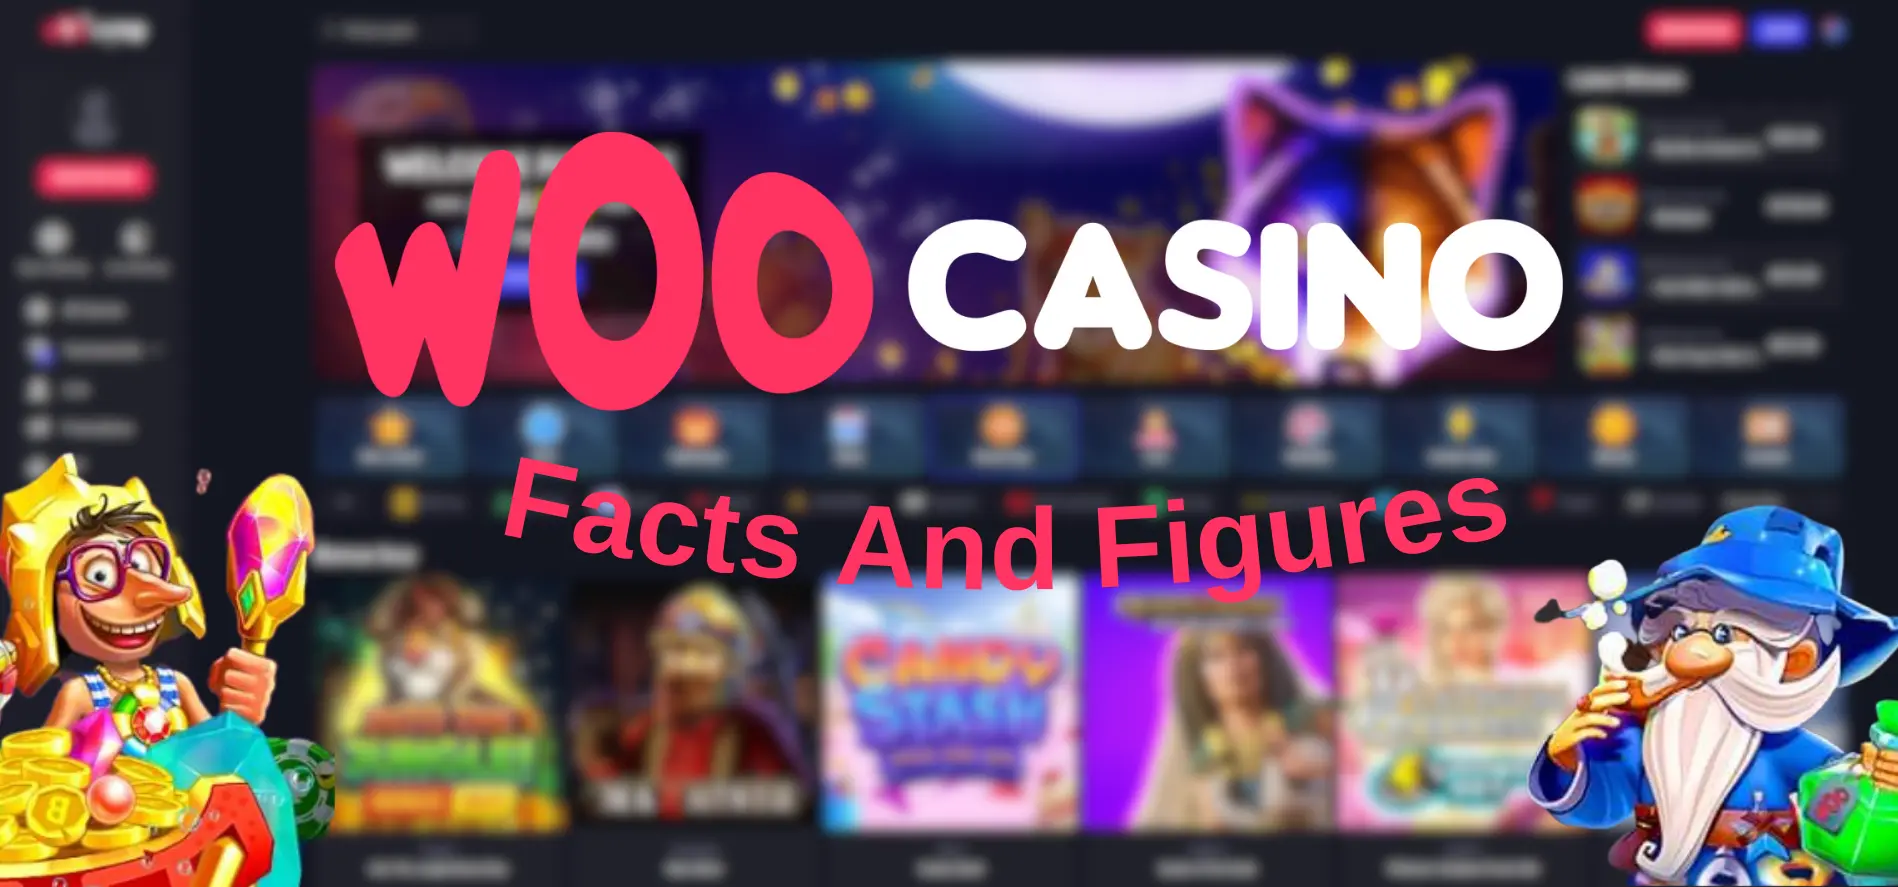 Woo Casino Facts and Figures